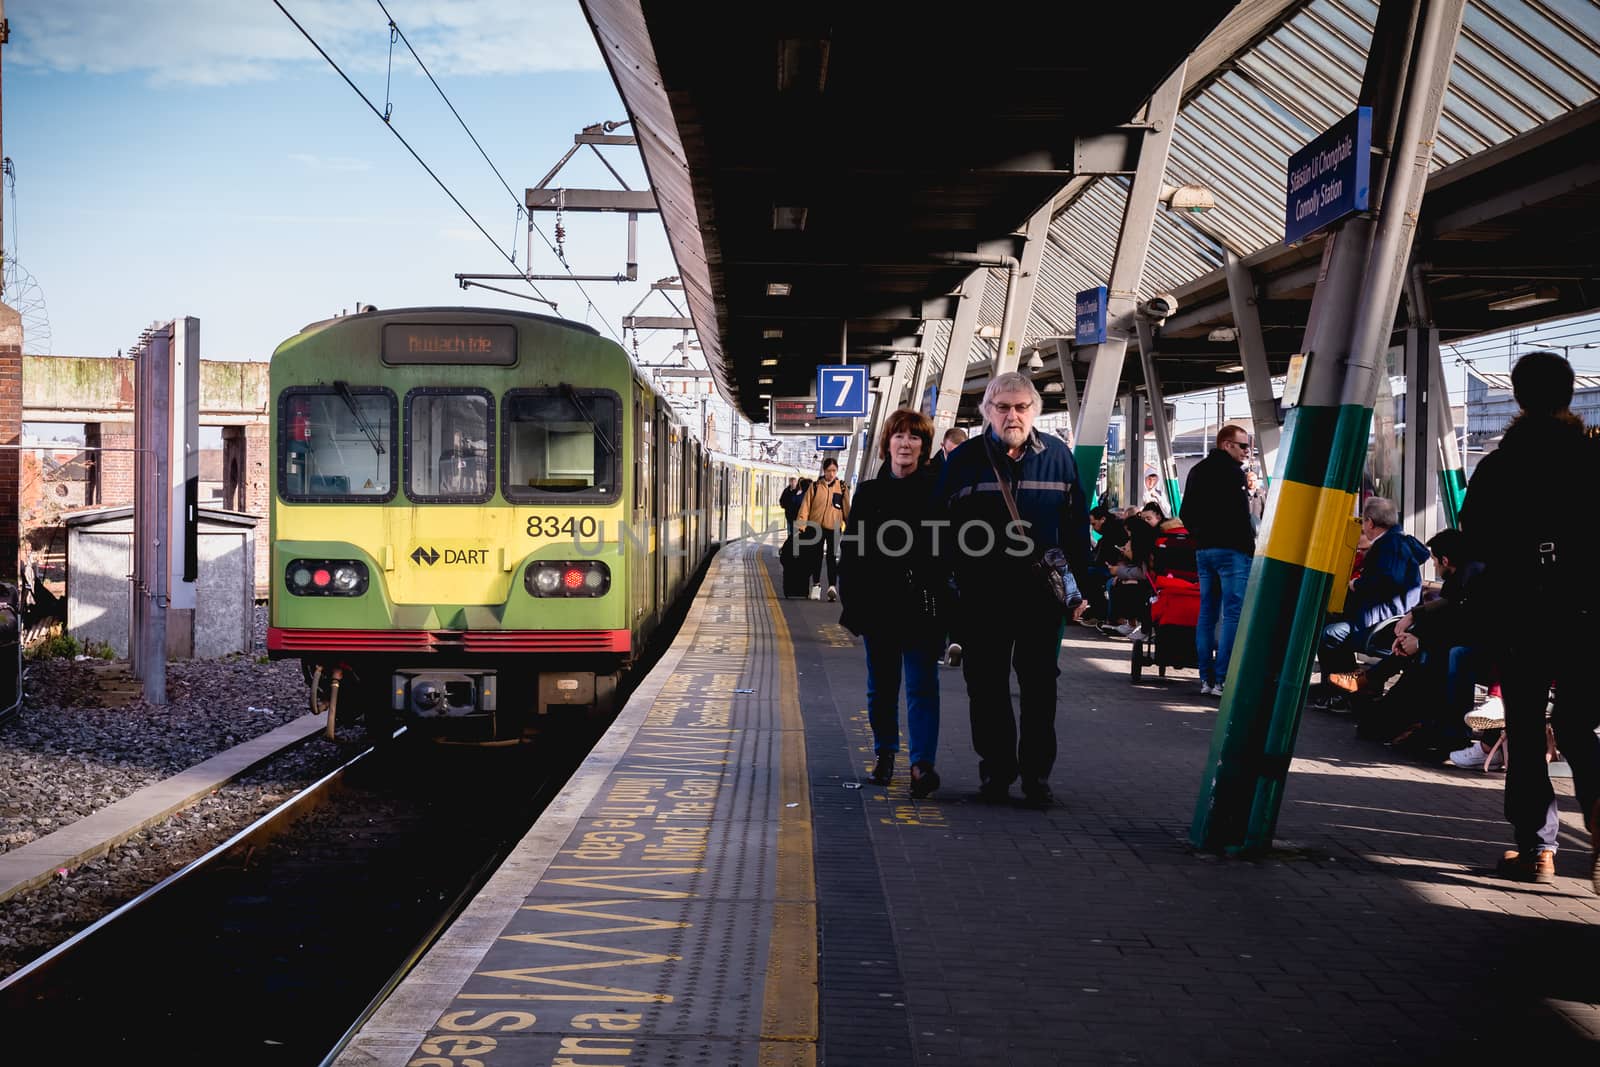 Dublin, Ireland - February 15, 2019: Passengers walking on the platform of Connolly DART train station (Staisiun ui Chonghaile) on a winter day